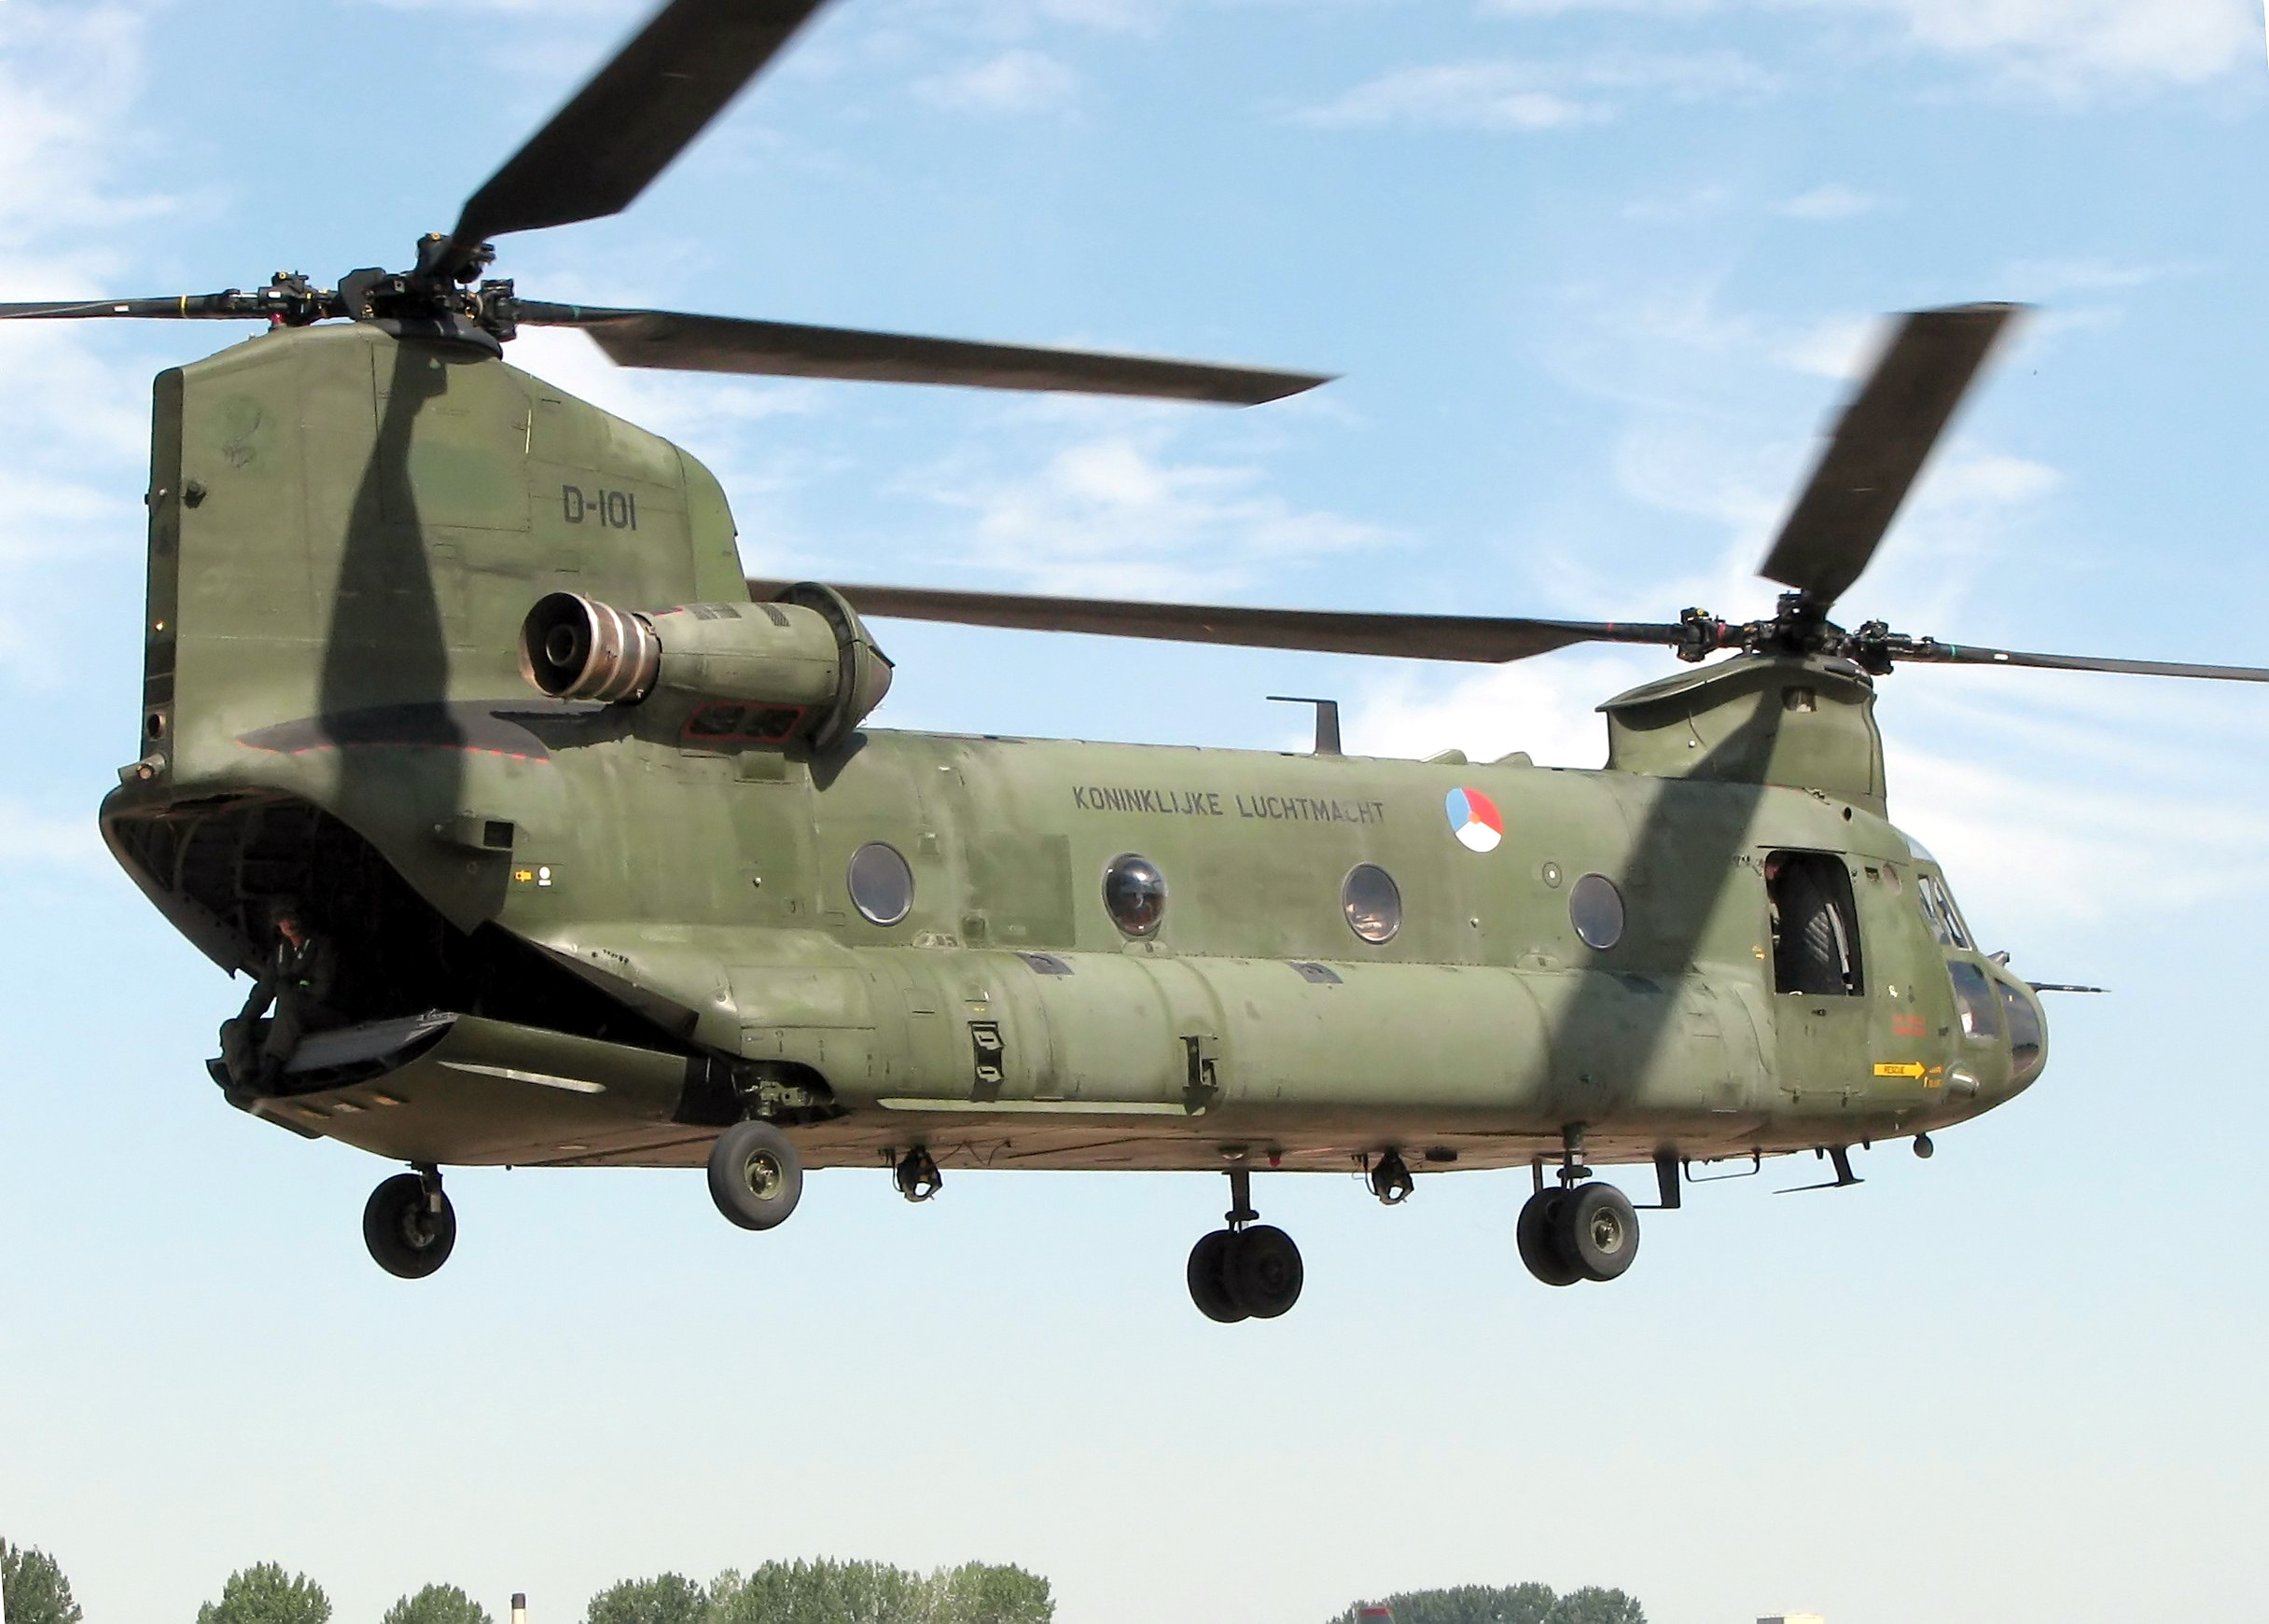 http://upload.wikimedia.org/wikipedia/commons/1/1a/Chinook.ch-47d.d-101.rnethaf.arp.jpg